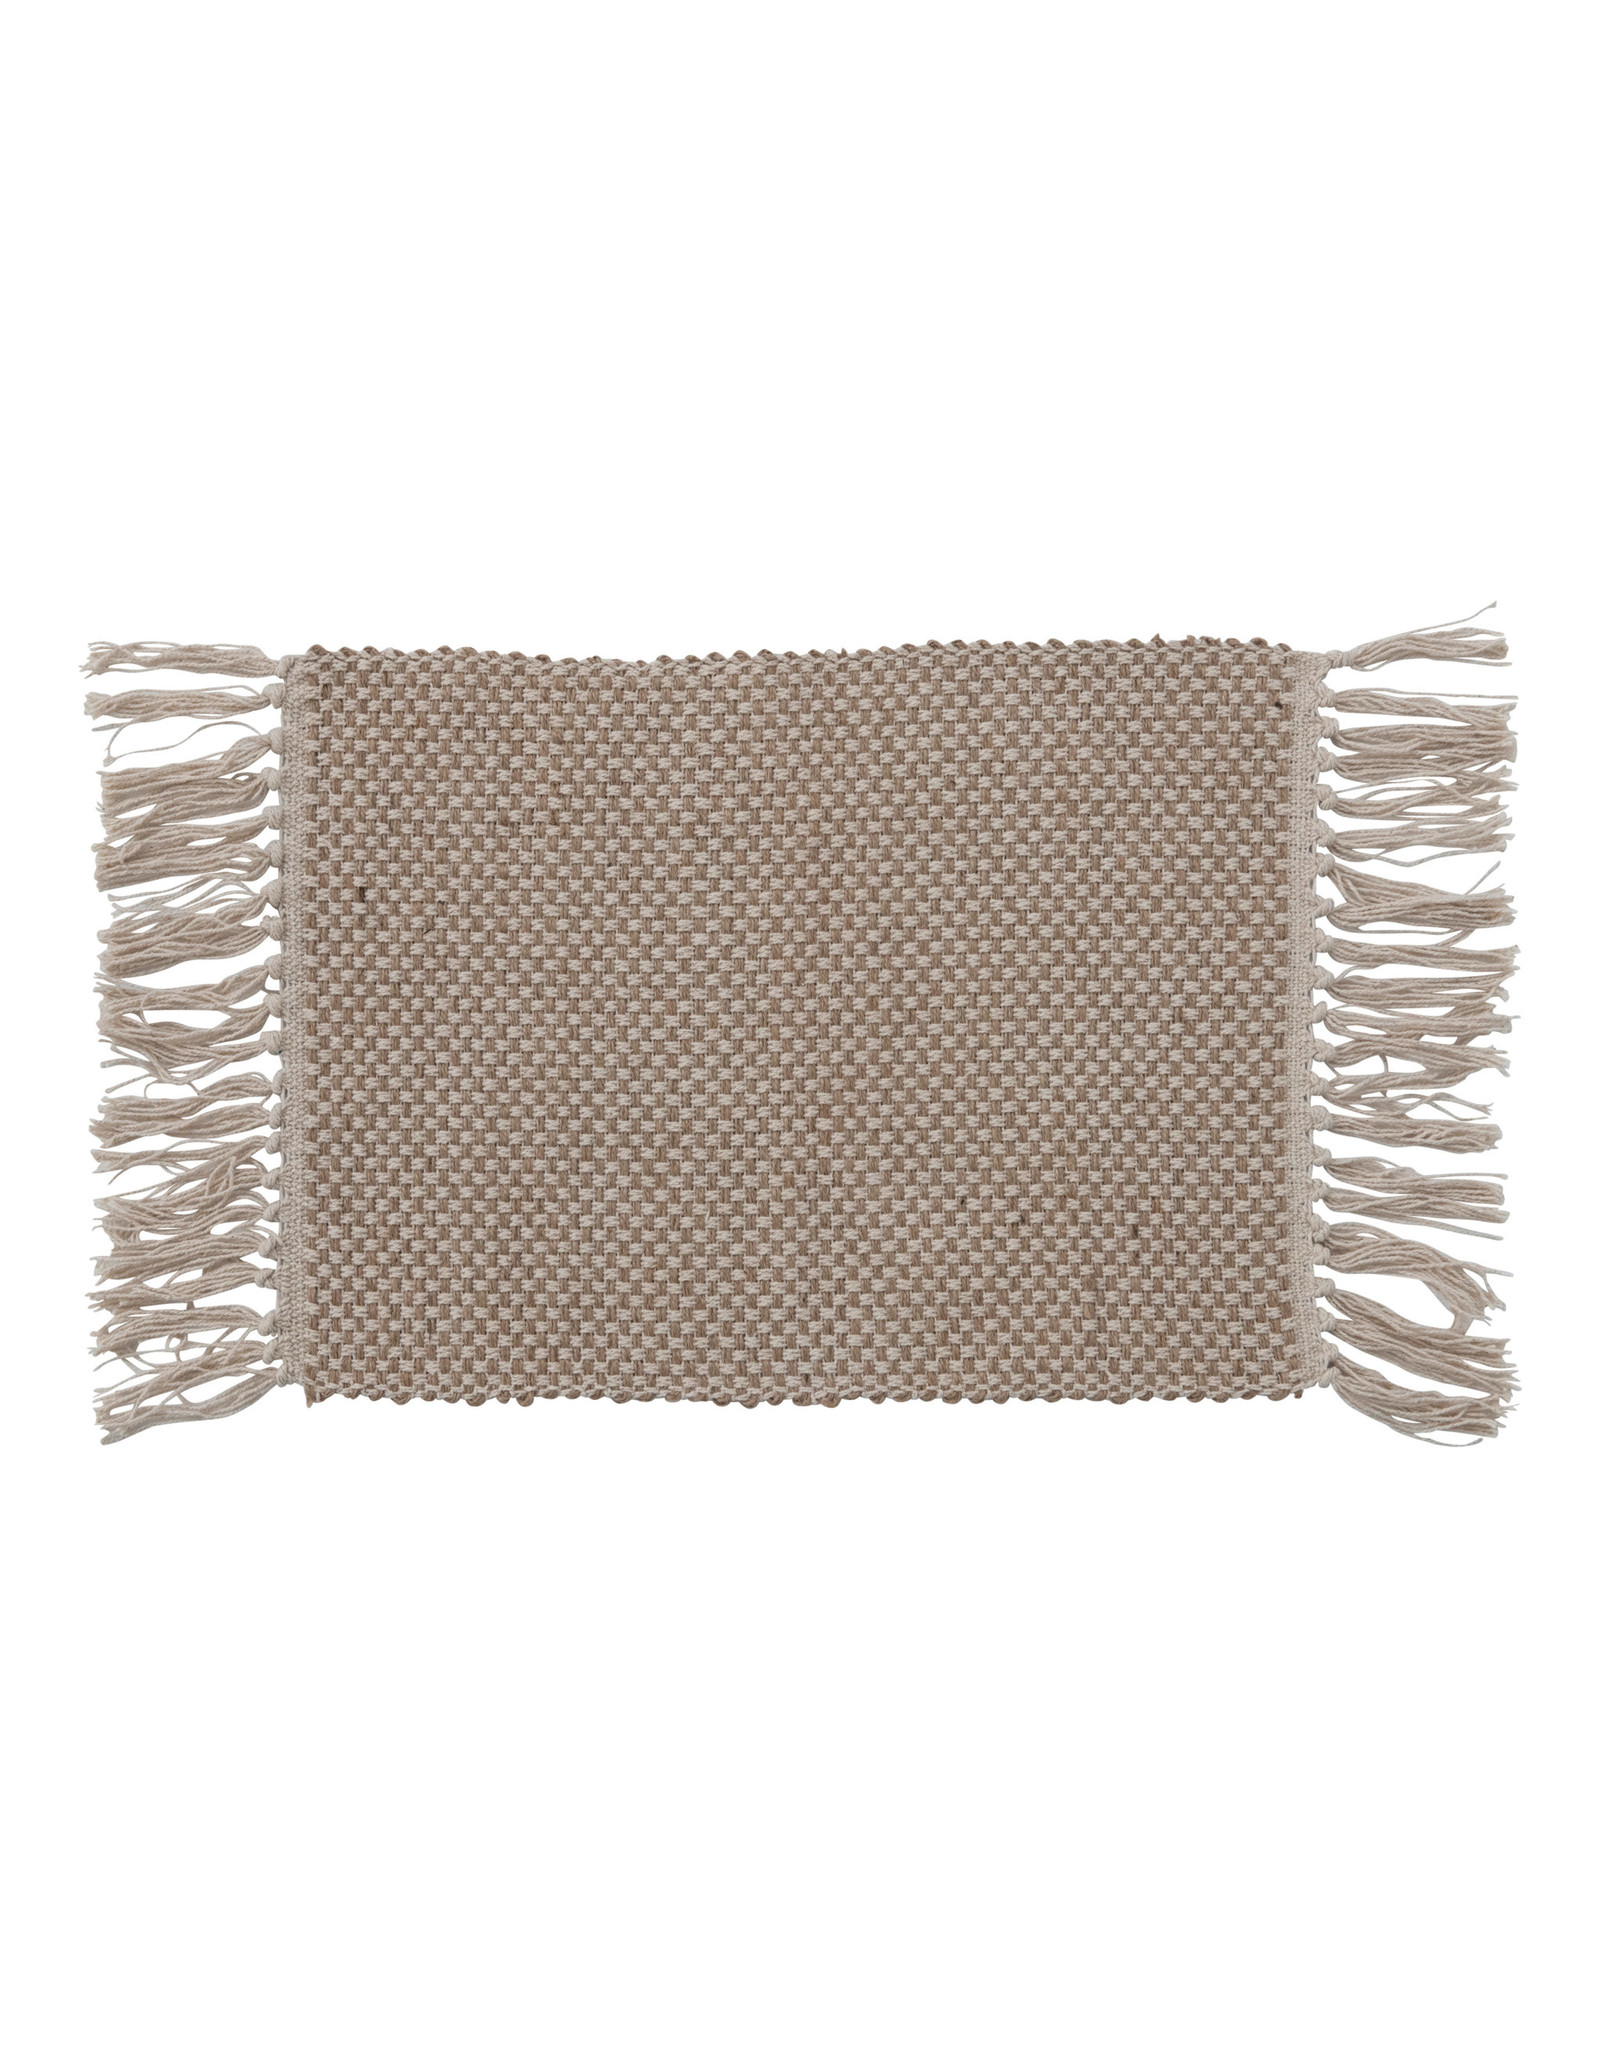 DF5656 Woven Jute and Cotton Placemat with Fringe